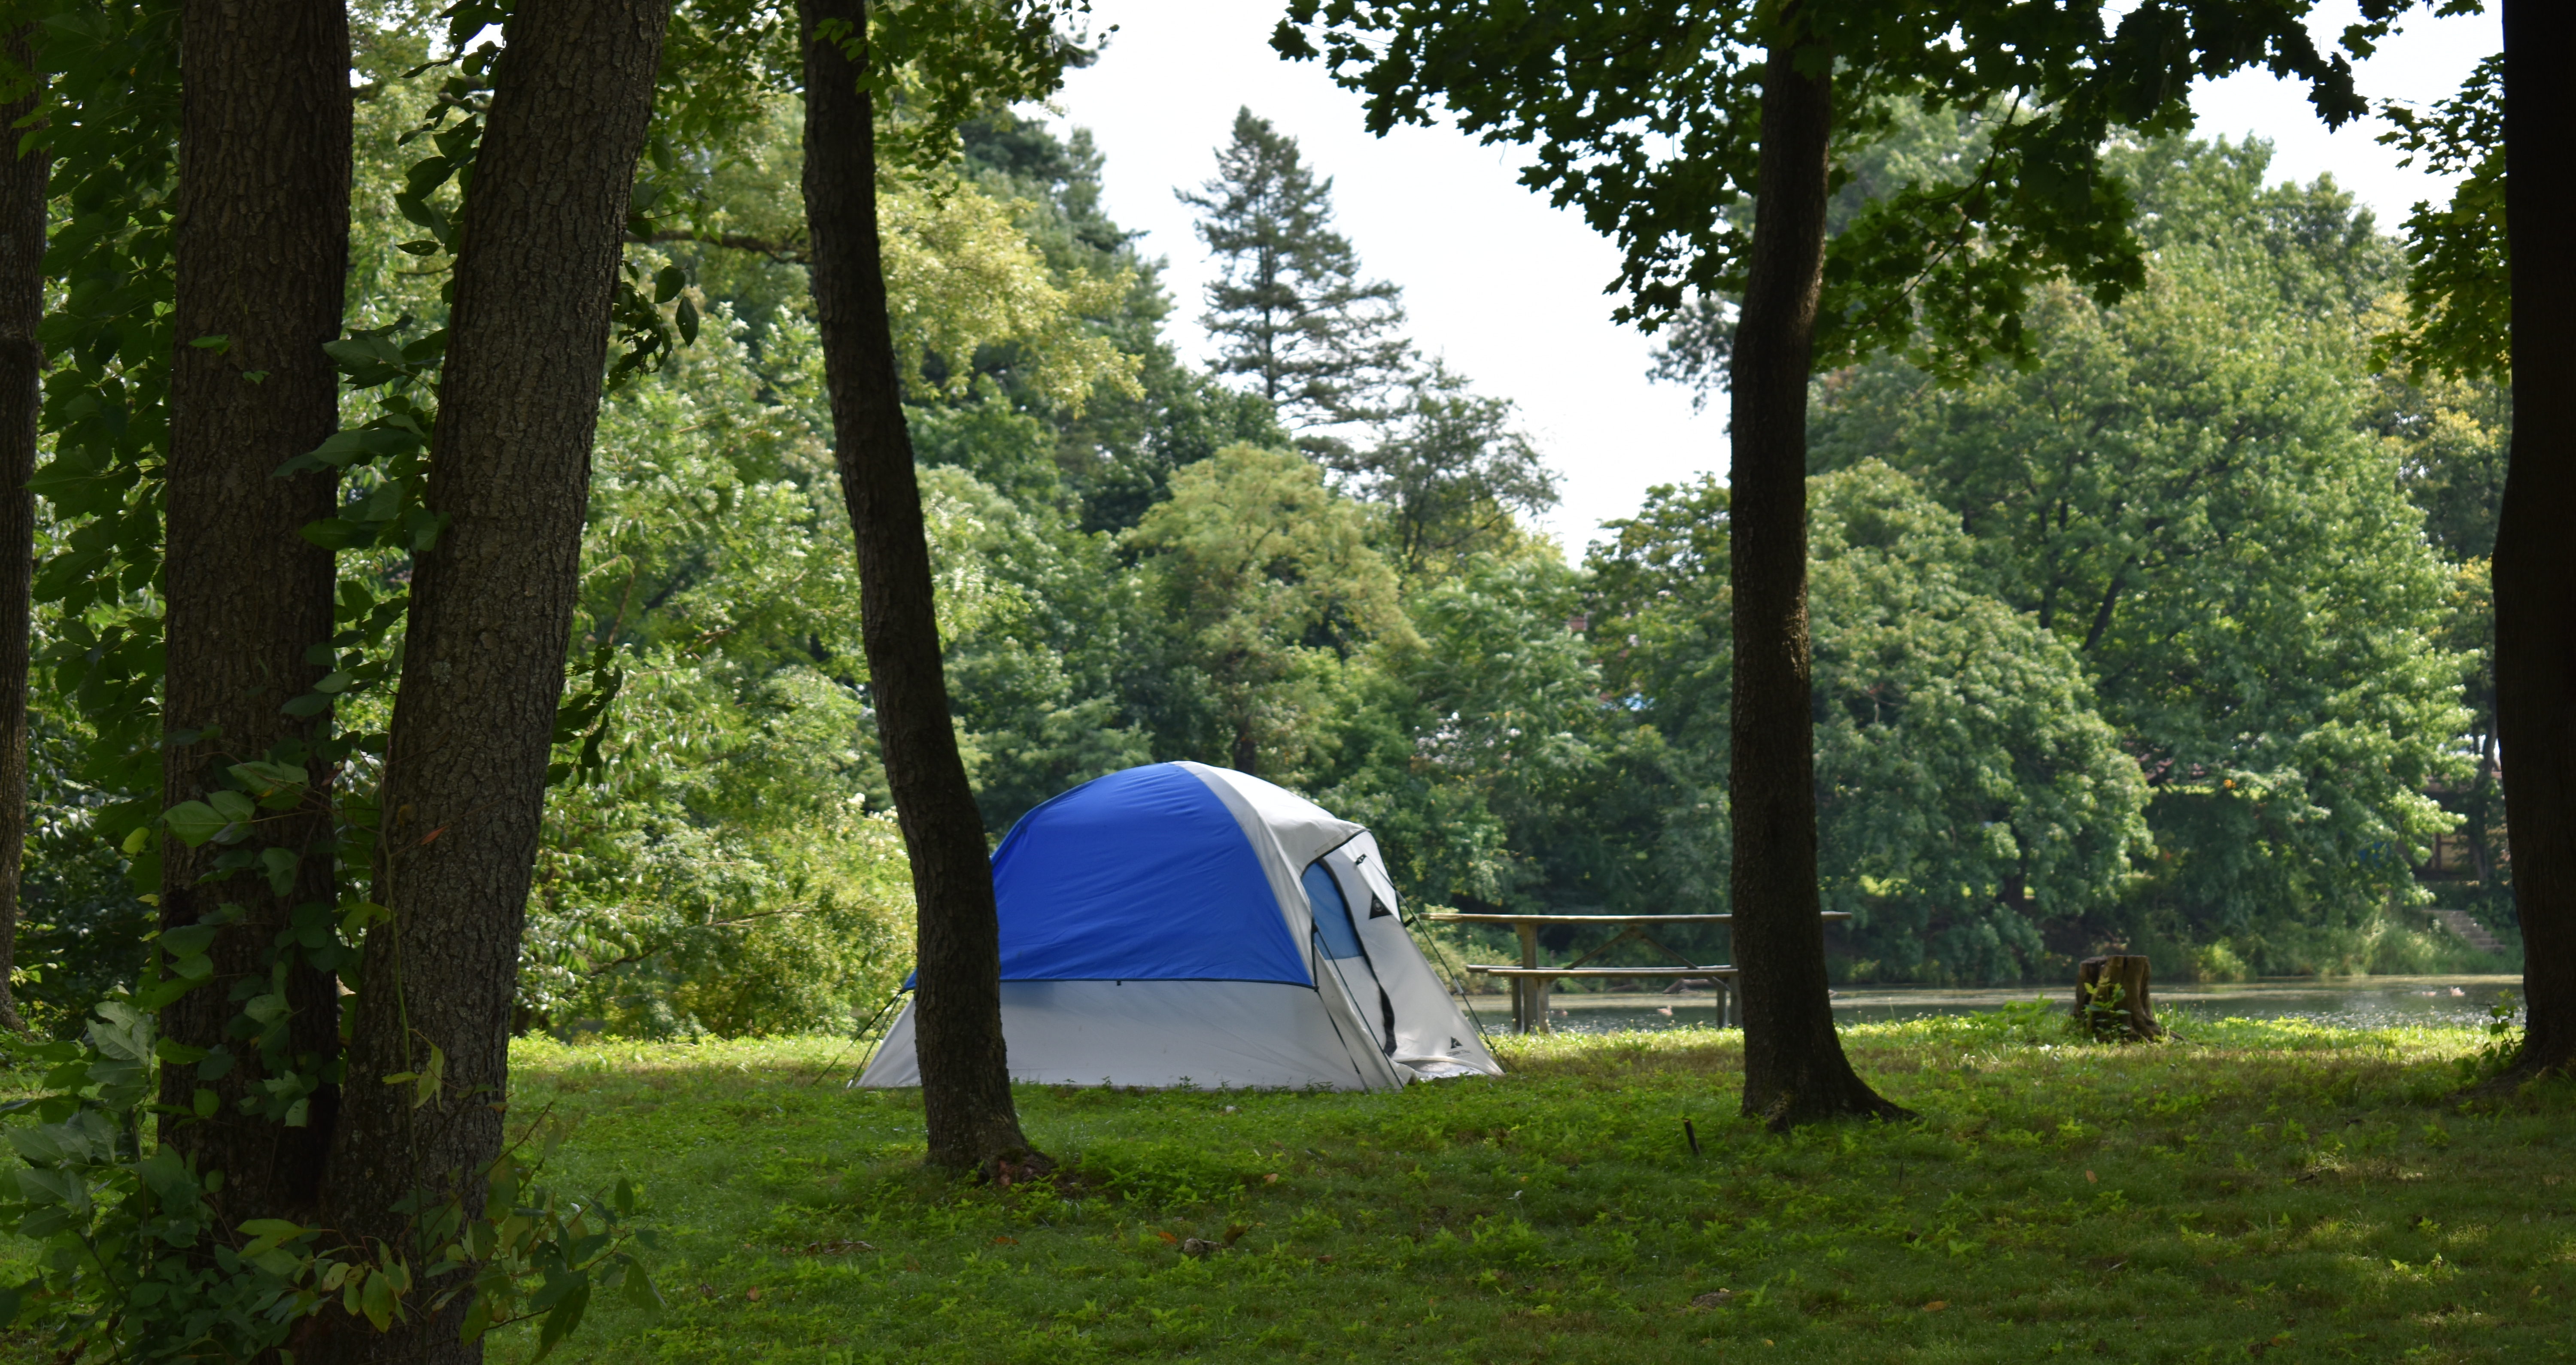 Tent at Stoever's dam park